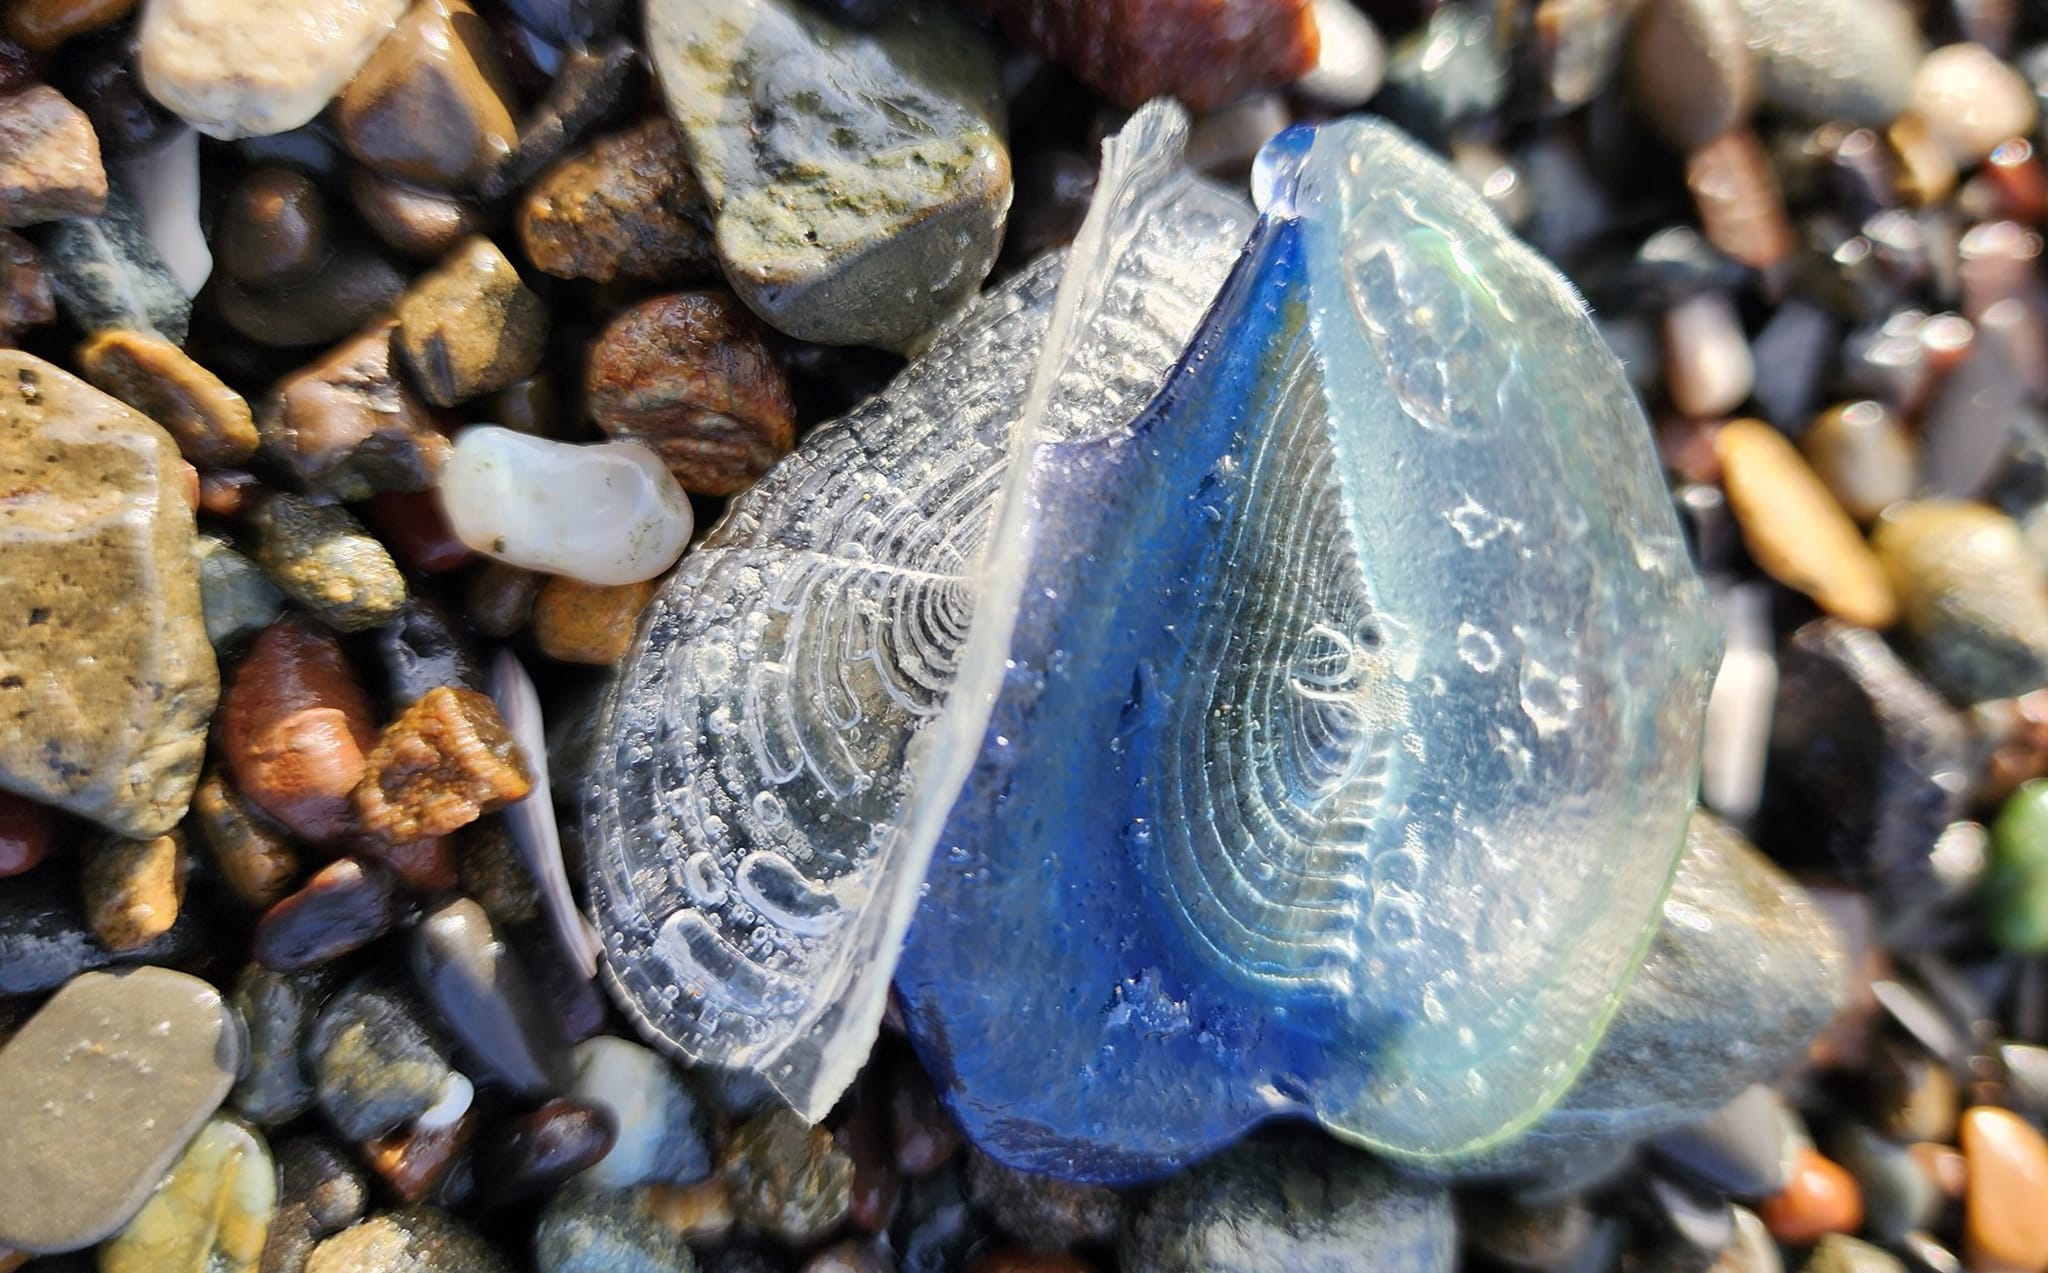 This image shows Velella velella, (by-the-wind sailors) that washed up on beaches in California in this image on March 29, 2024. — Facebook/Tammy Latchford